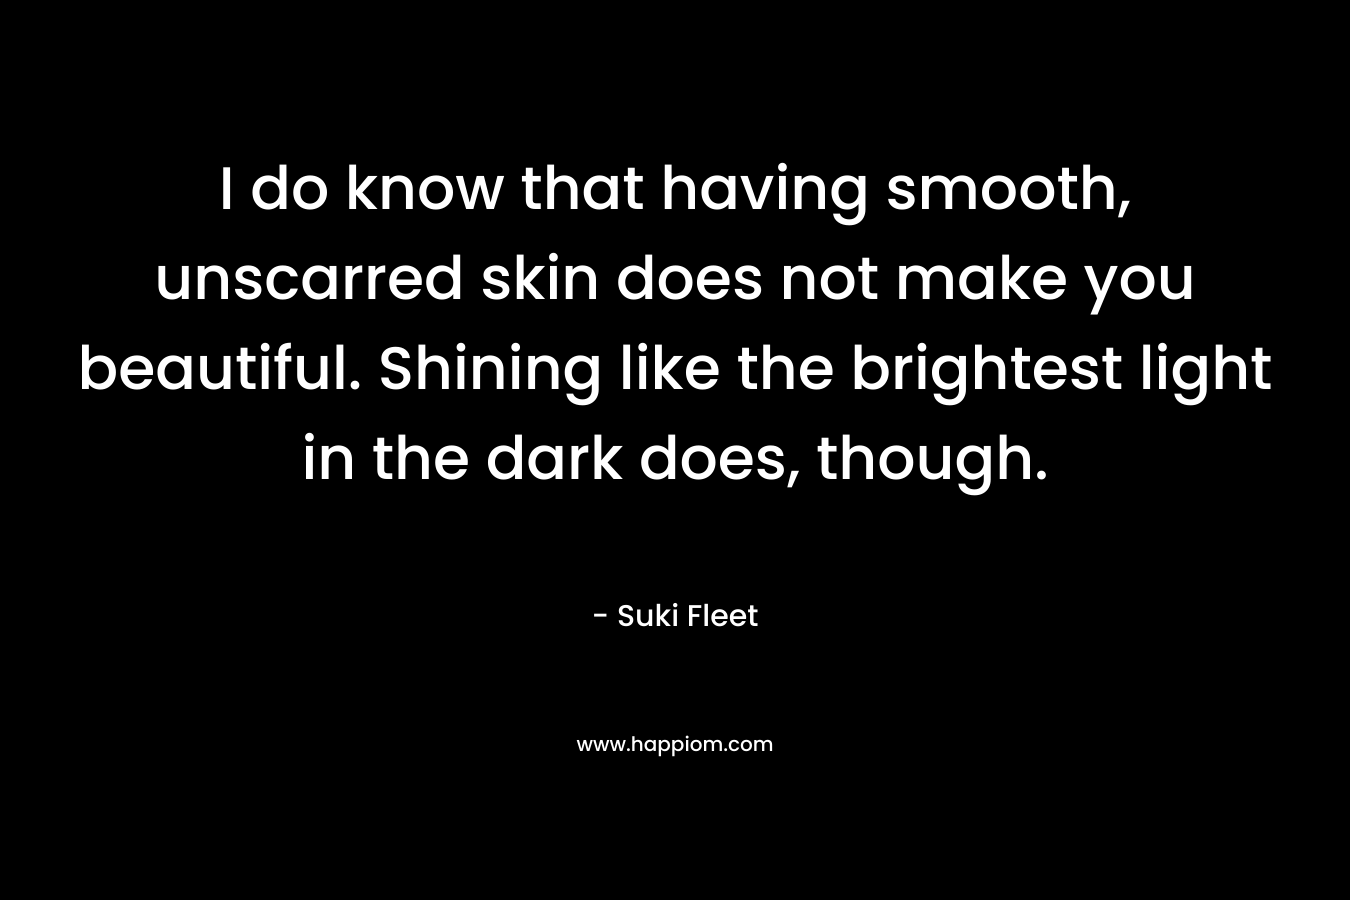 I do know that having smooth, unscarred skin does not make you beautiful. Shining like the brightest light in the dark does, though.